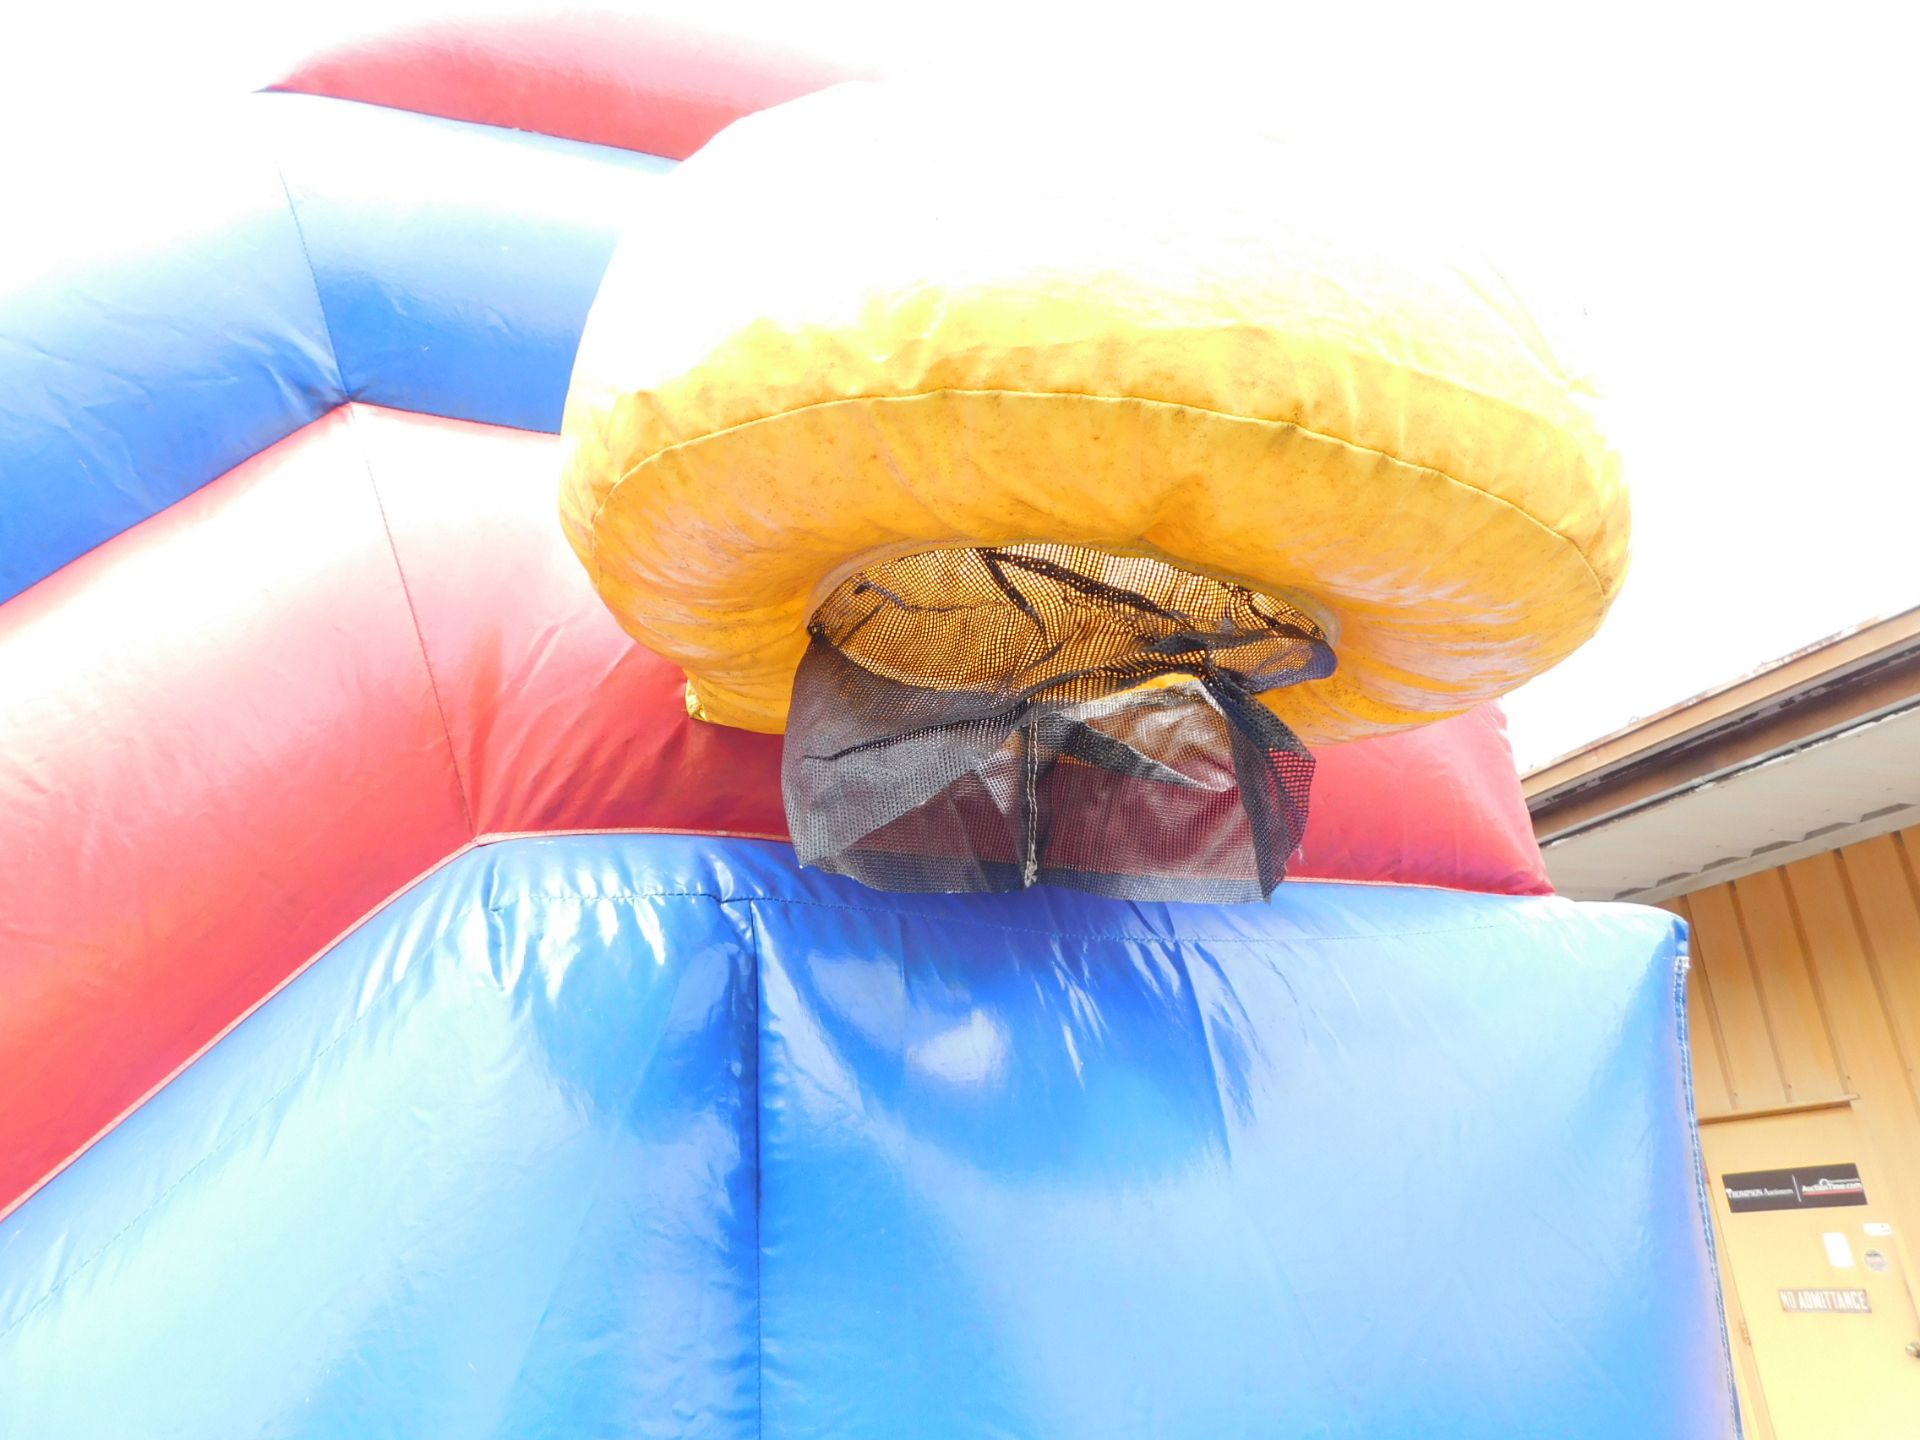 Sports Combo Bounce House w/Slide, 18'WX20'LX14'H, 2 blowers req. - Image 6 of 19